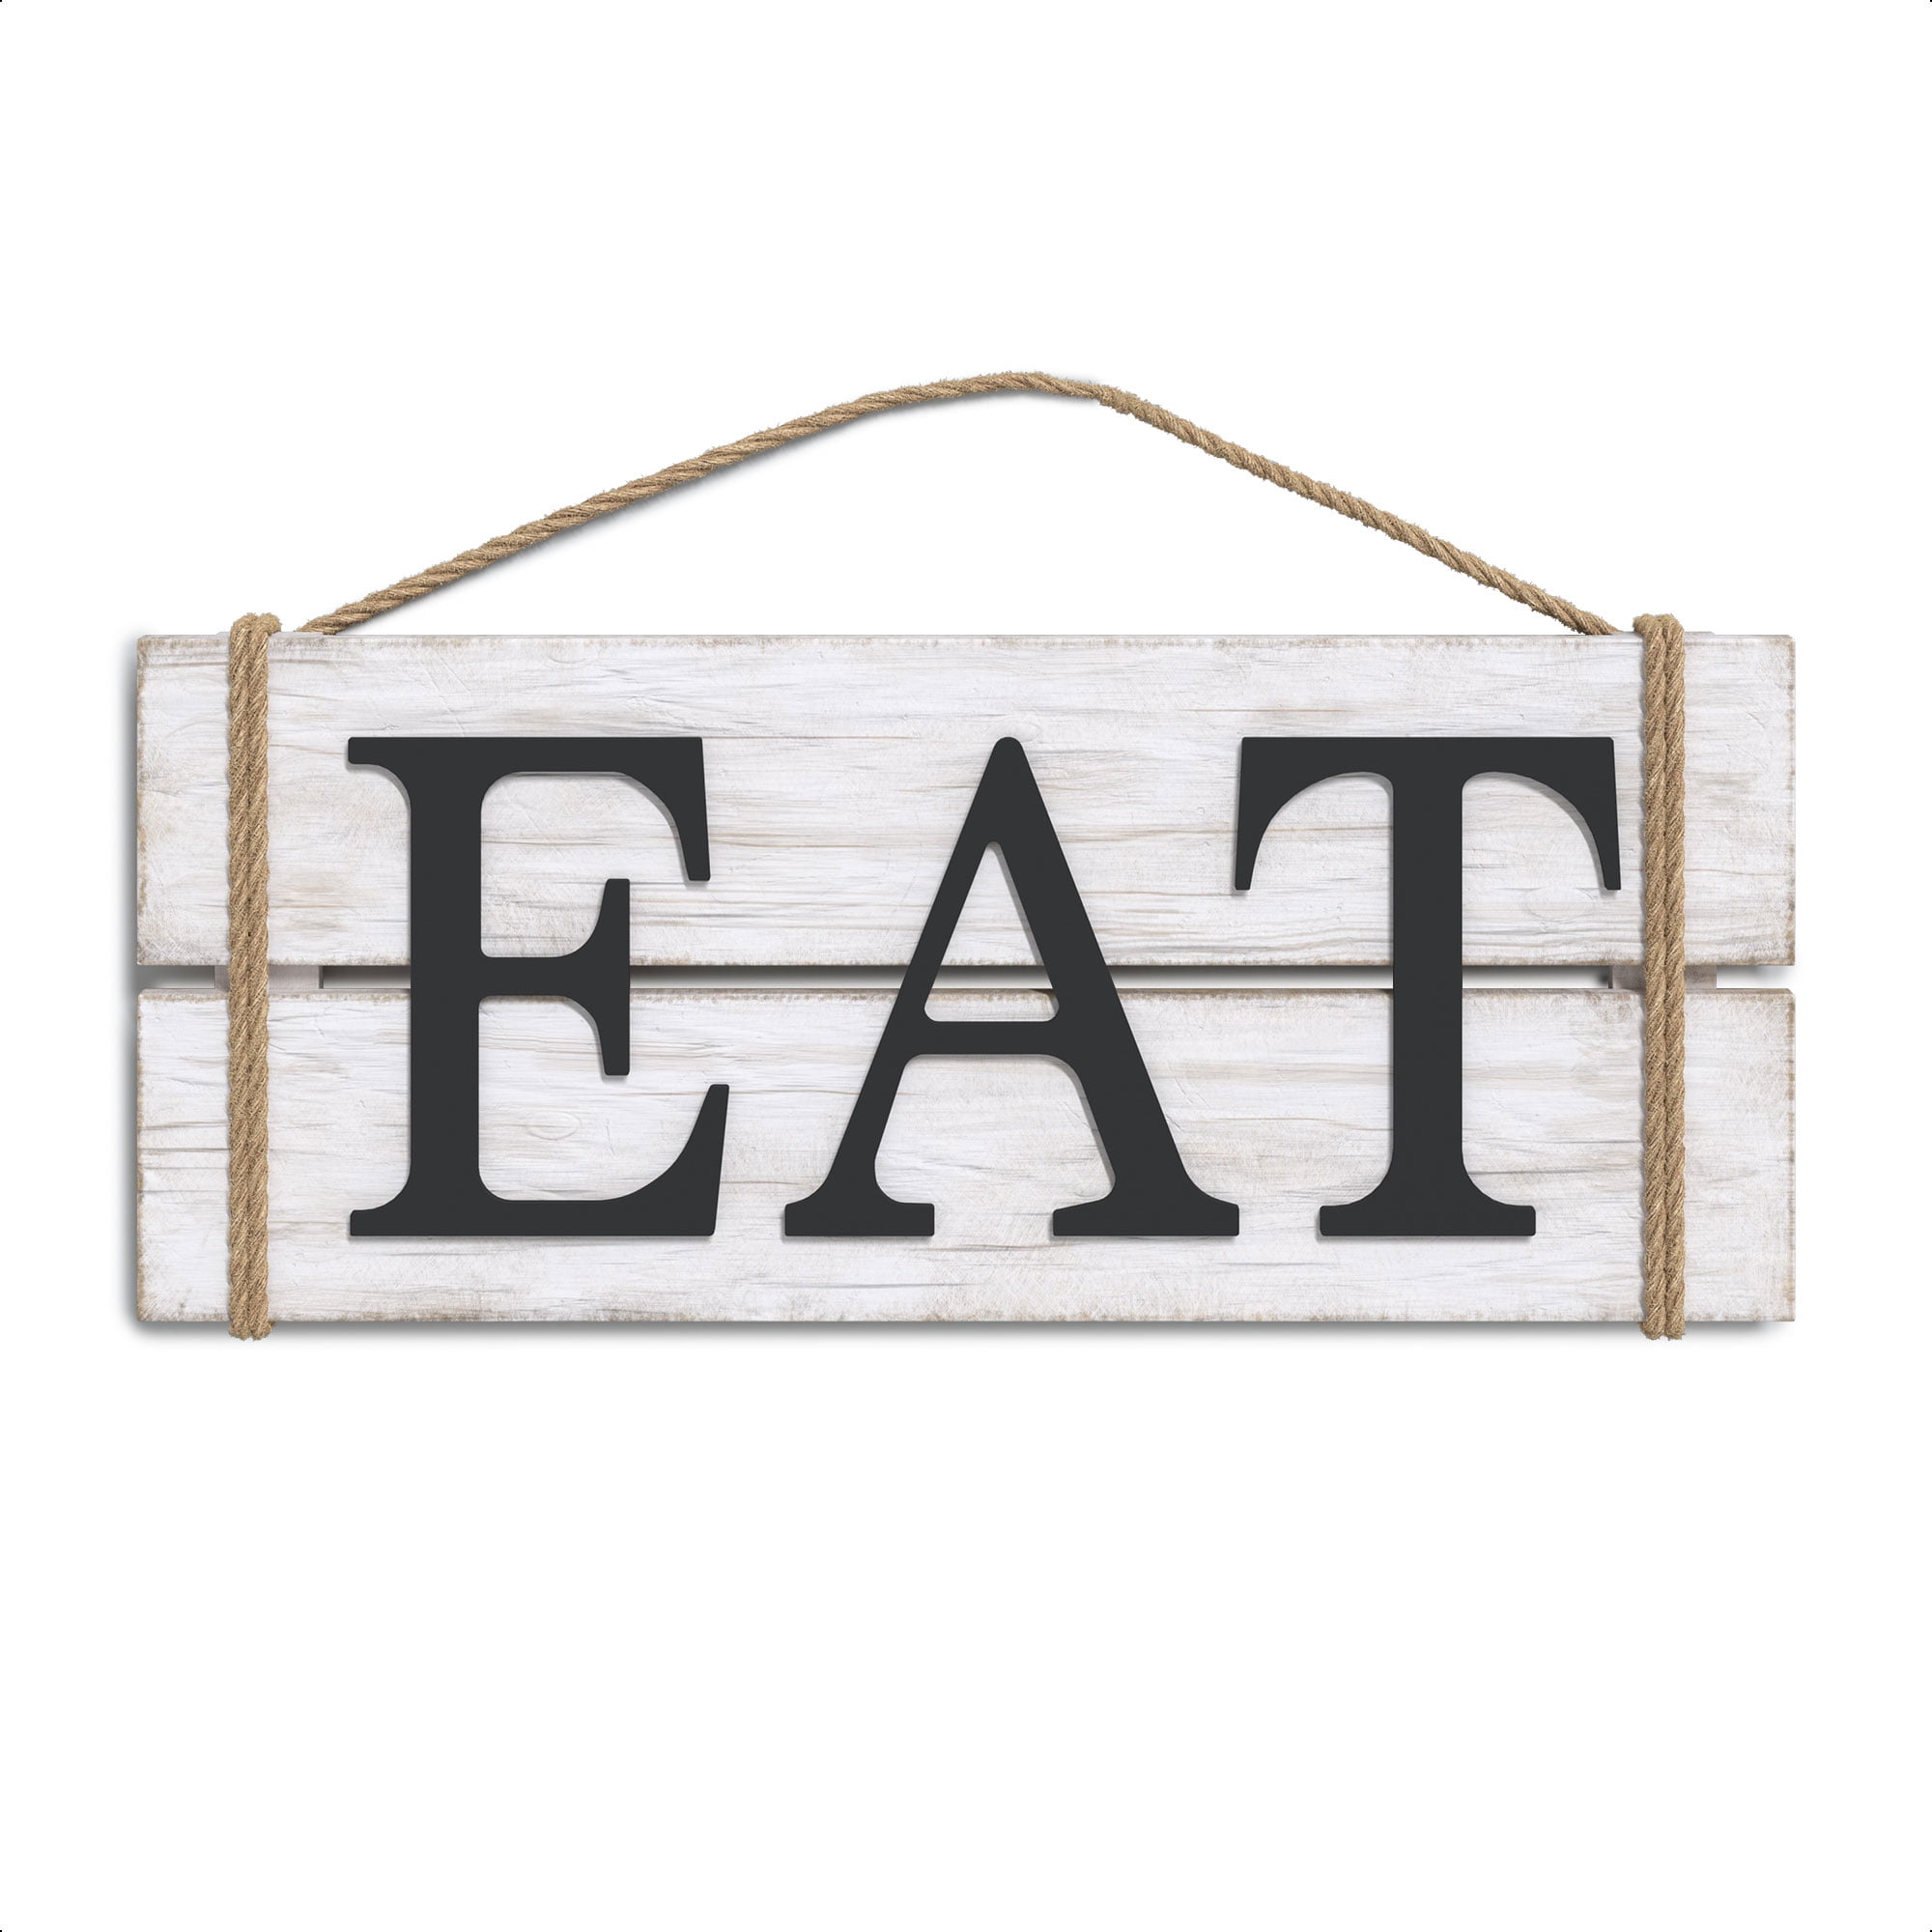 Kitchen Plaque Rustic Shabby Chic style FARMERS MARKET Hanging Plaque sign with 